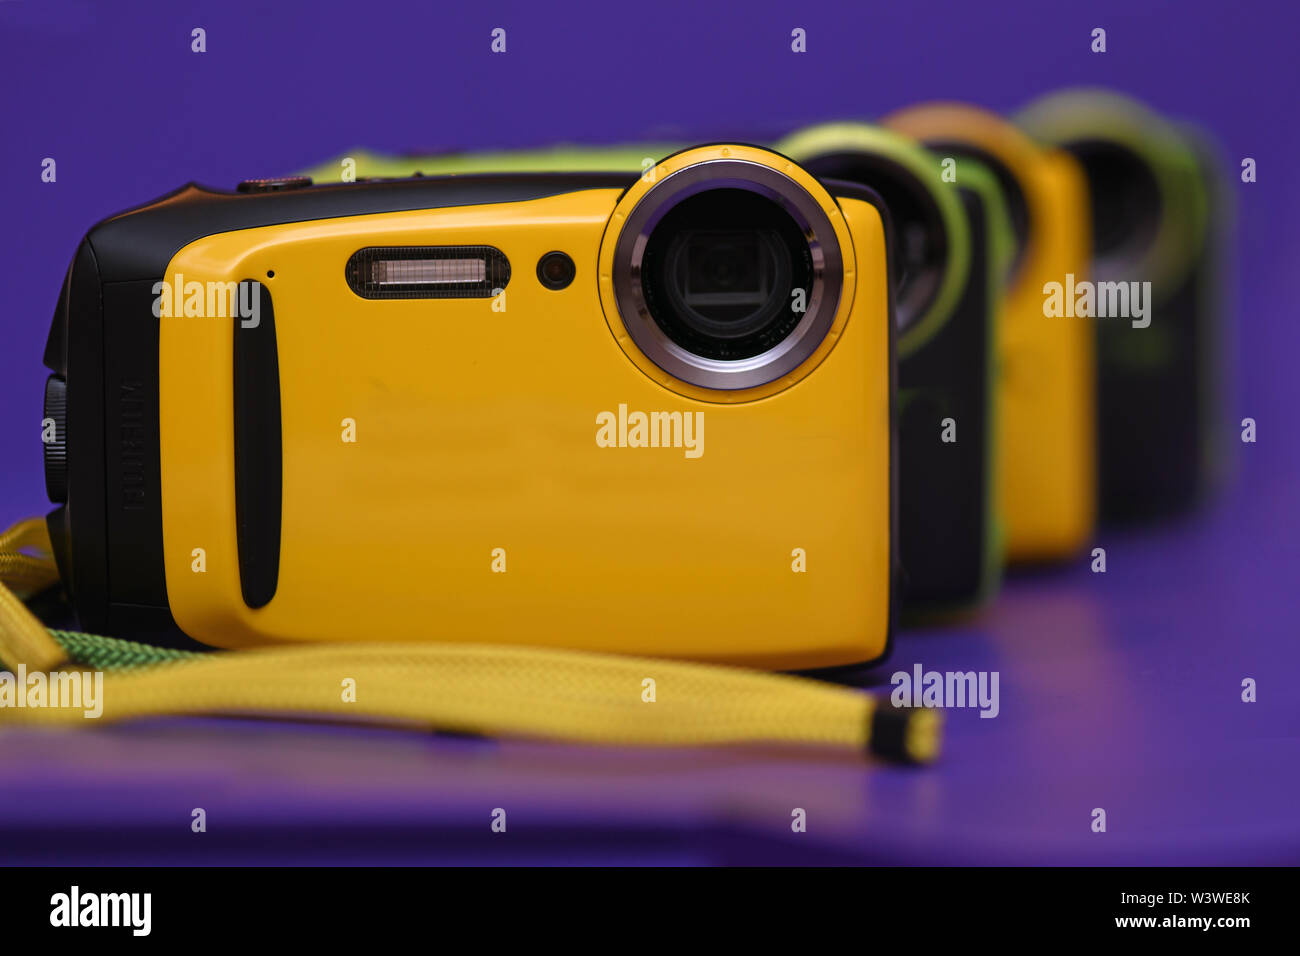 A lineup of new coplourful yellow and green waterproof cameras Stock Photo